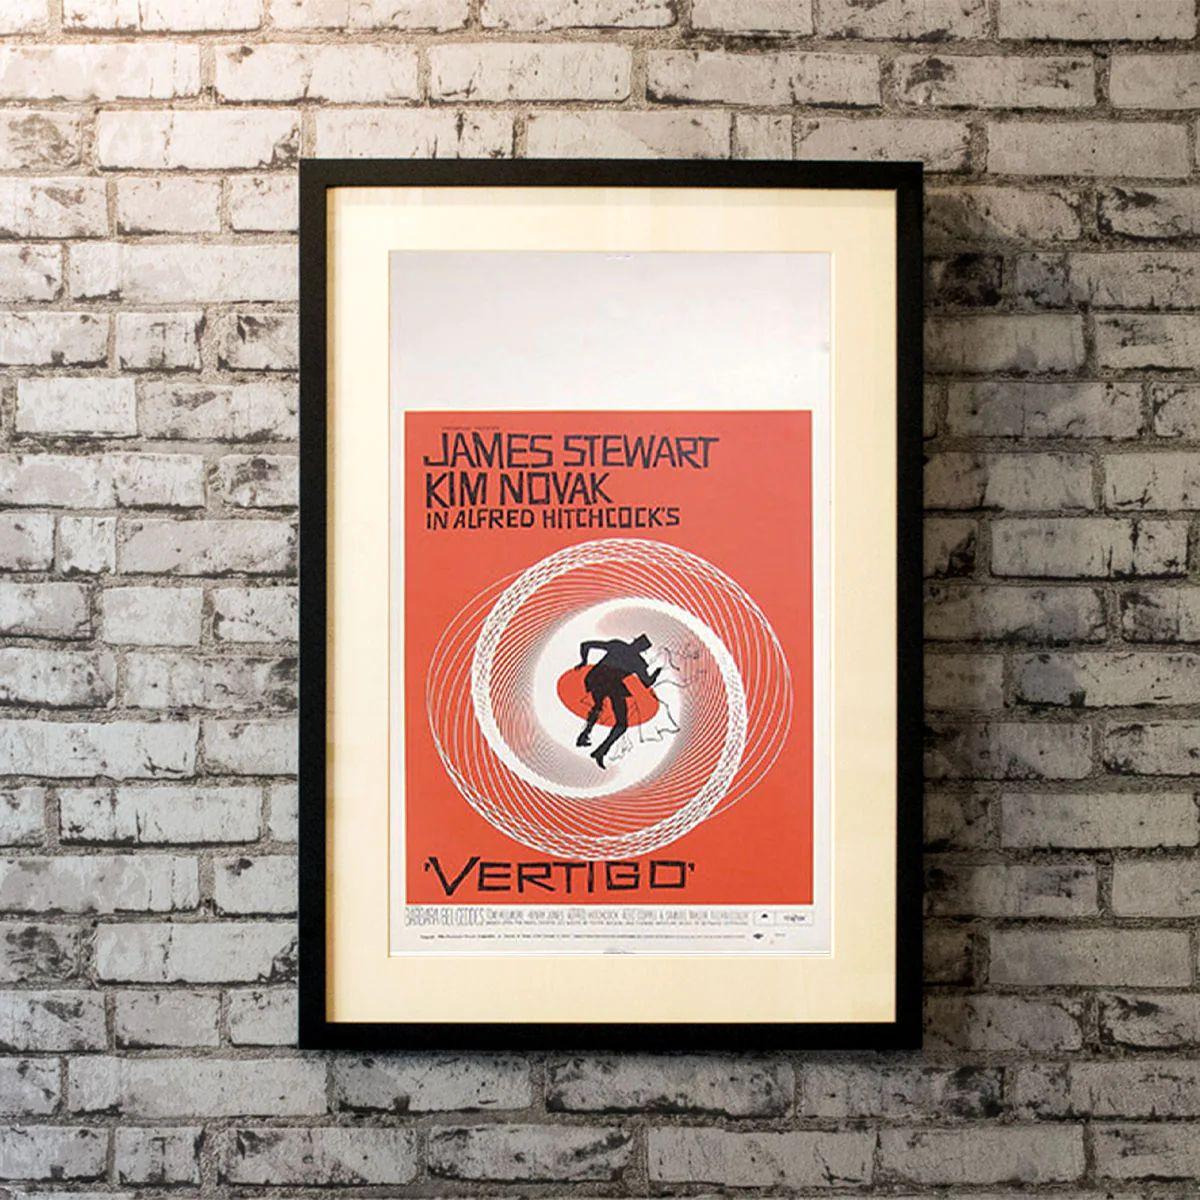 Vertigo, Unframed Poster, 1958

Original Window Card (14 X 22 Inches). A former San Francisco police detective juggles wrestling with his personal demons and becoming obsessed with the hauntingly beautiful woman he has been hired to trail, who may